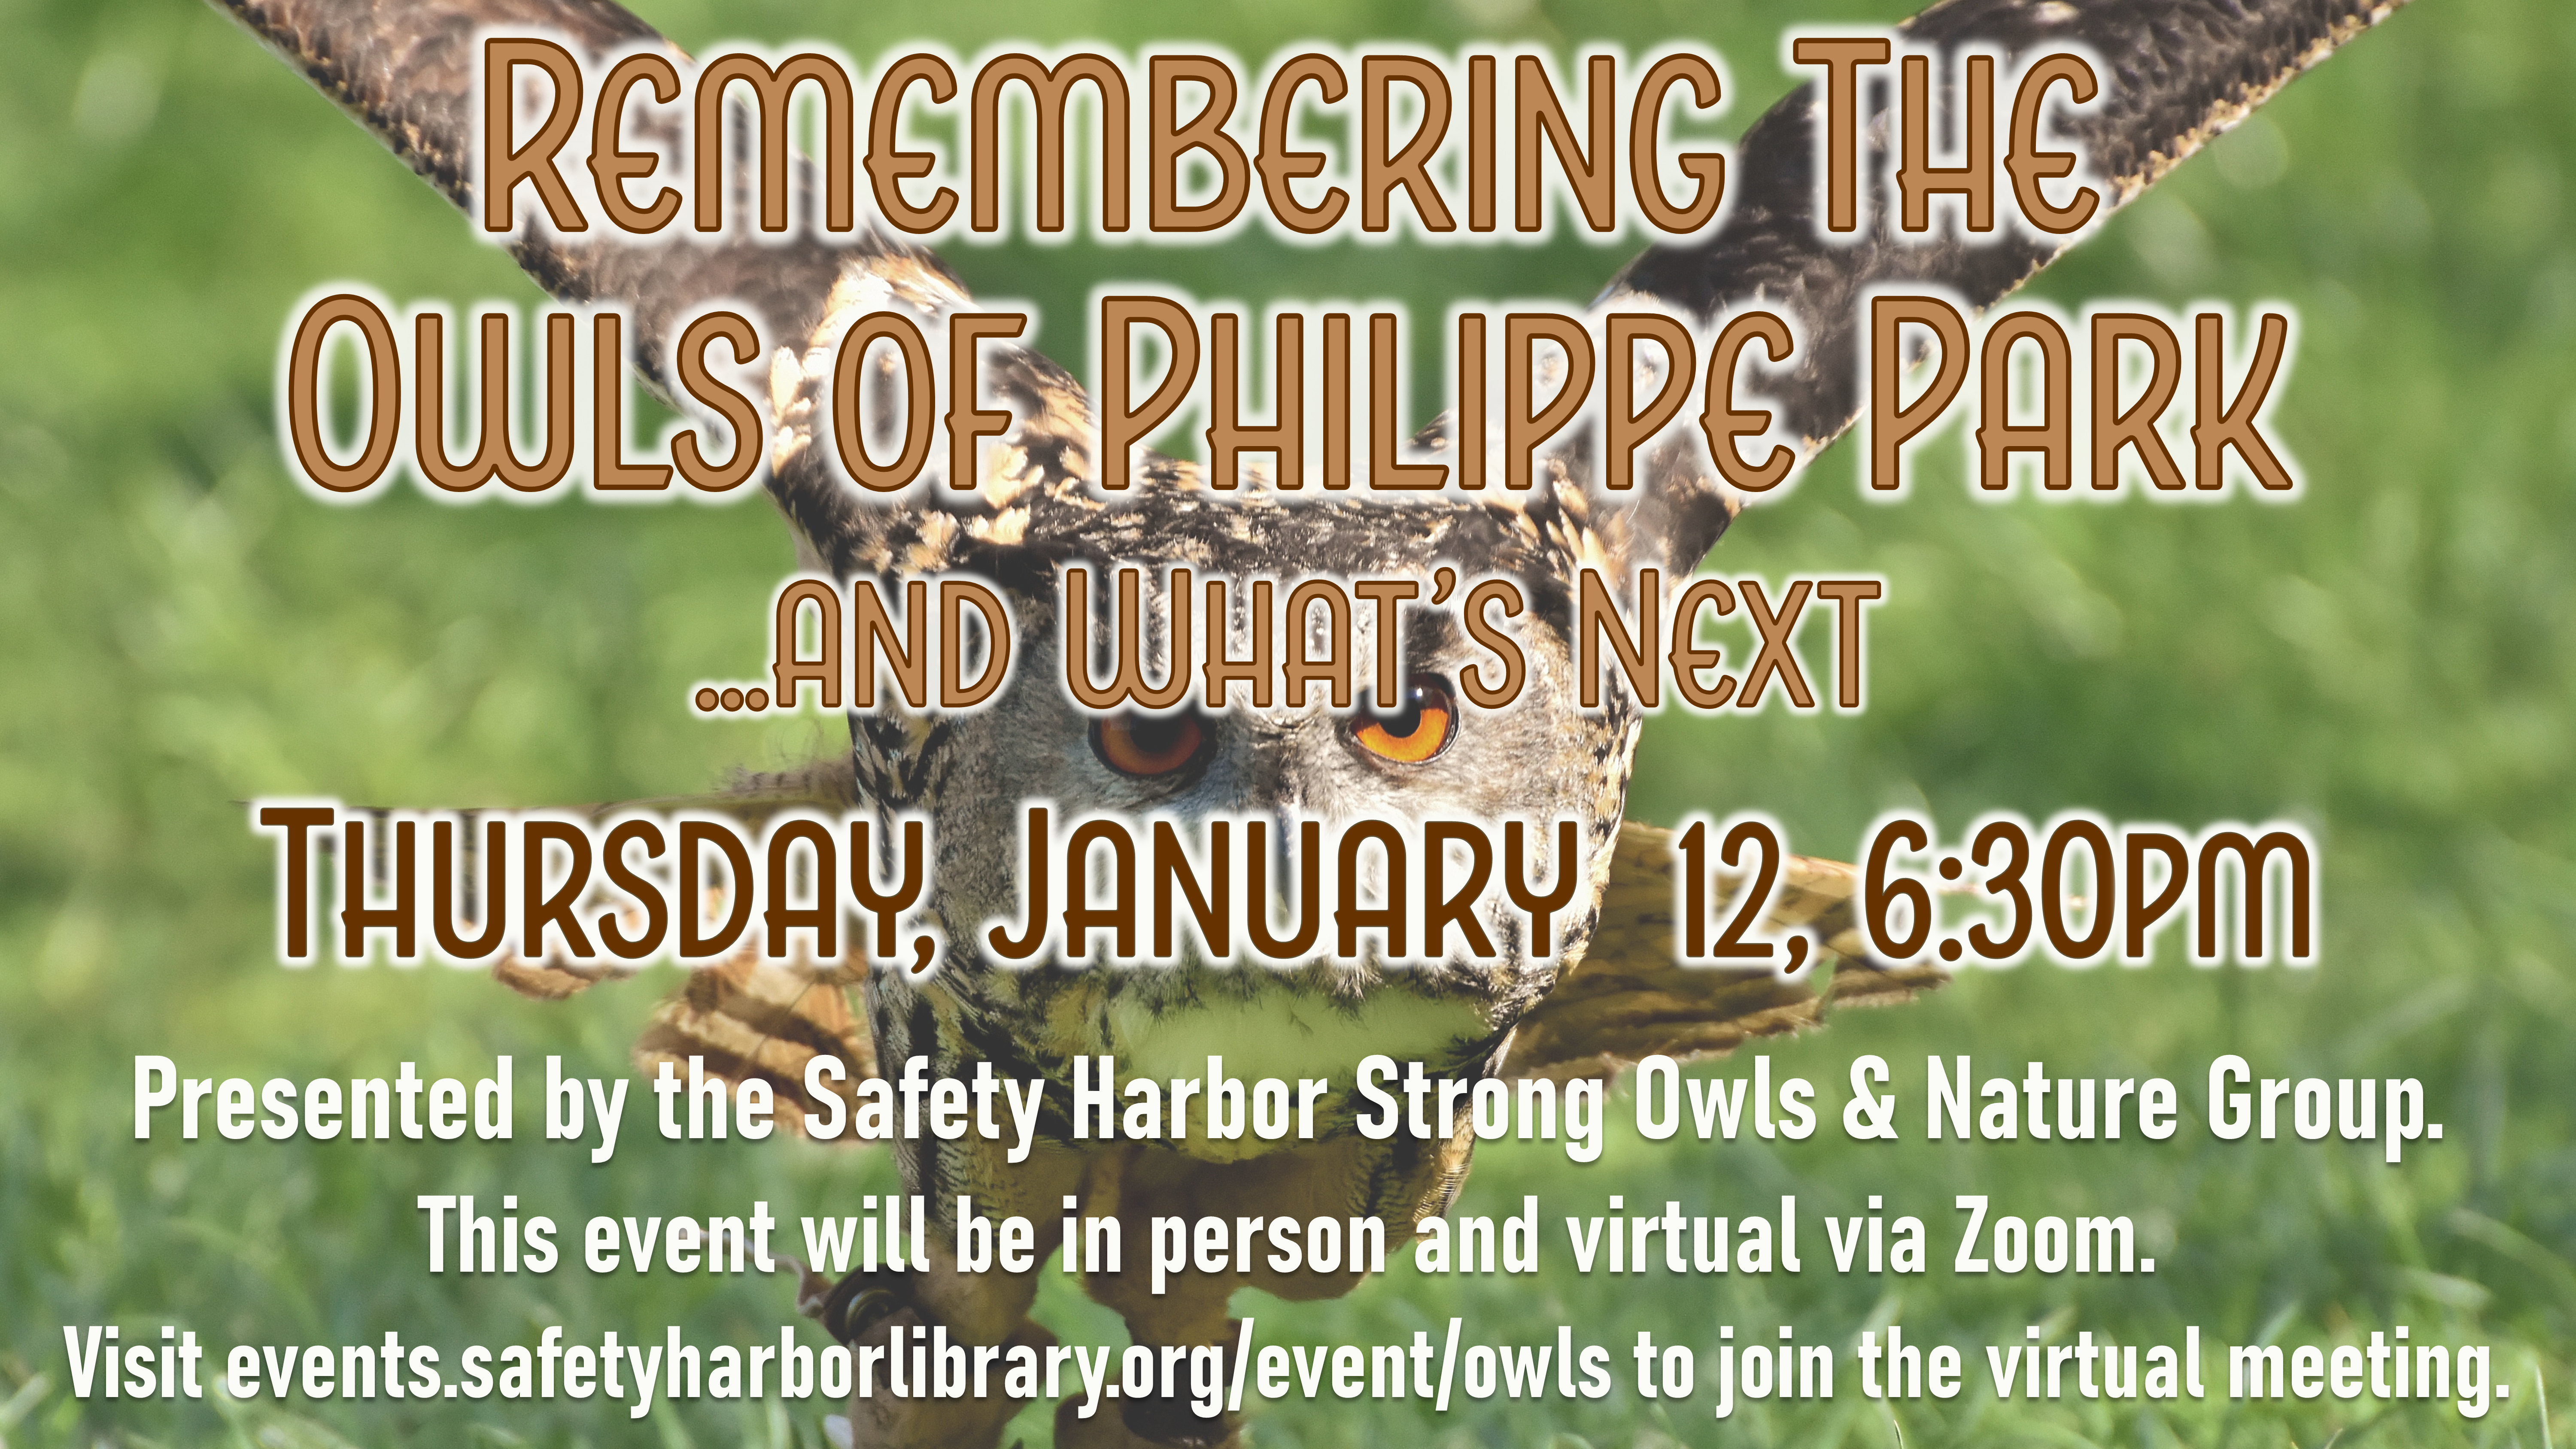 Remembering the Owls, Jan. 12